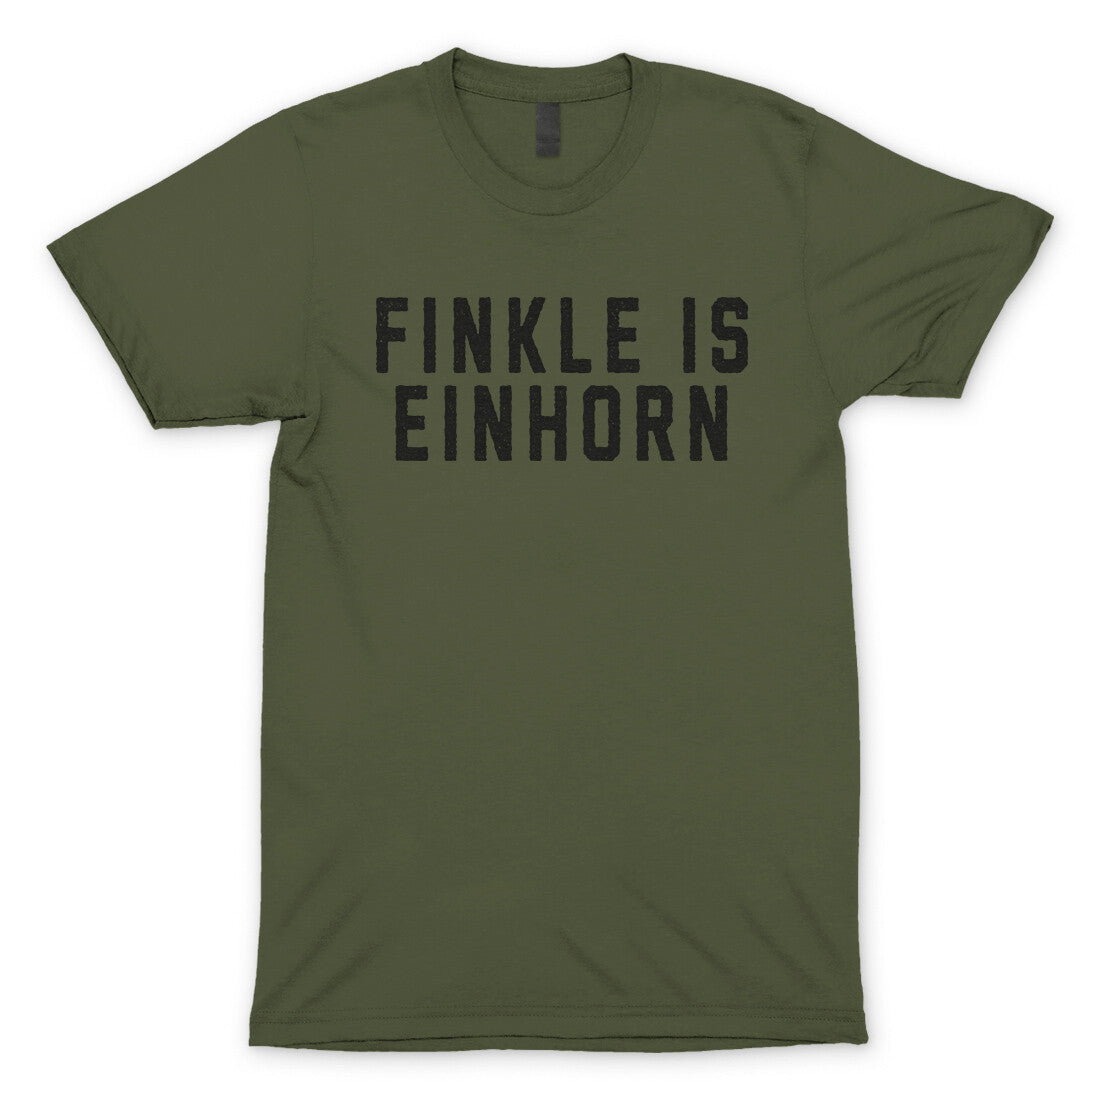 Finkle is Einhorn in Military Green Color